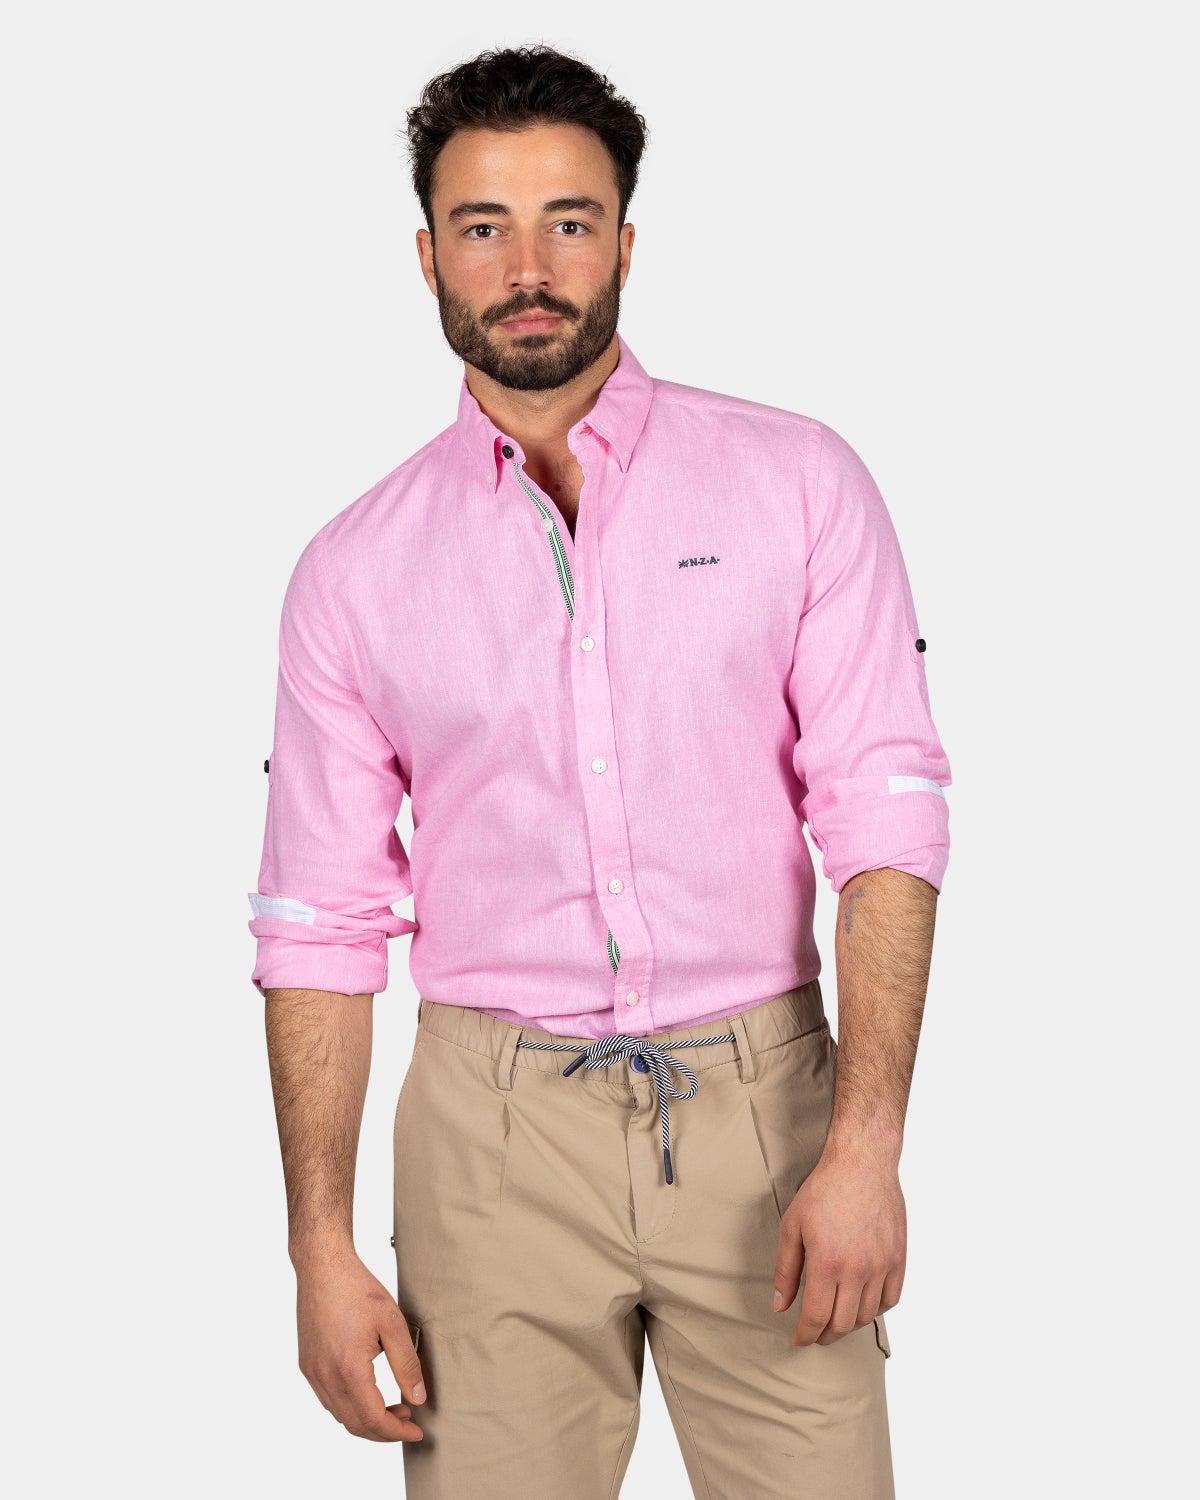 Brightly colored plain shirt - Bright Pink